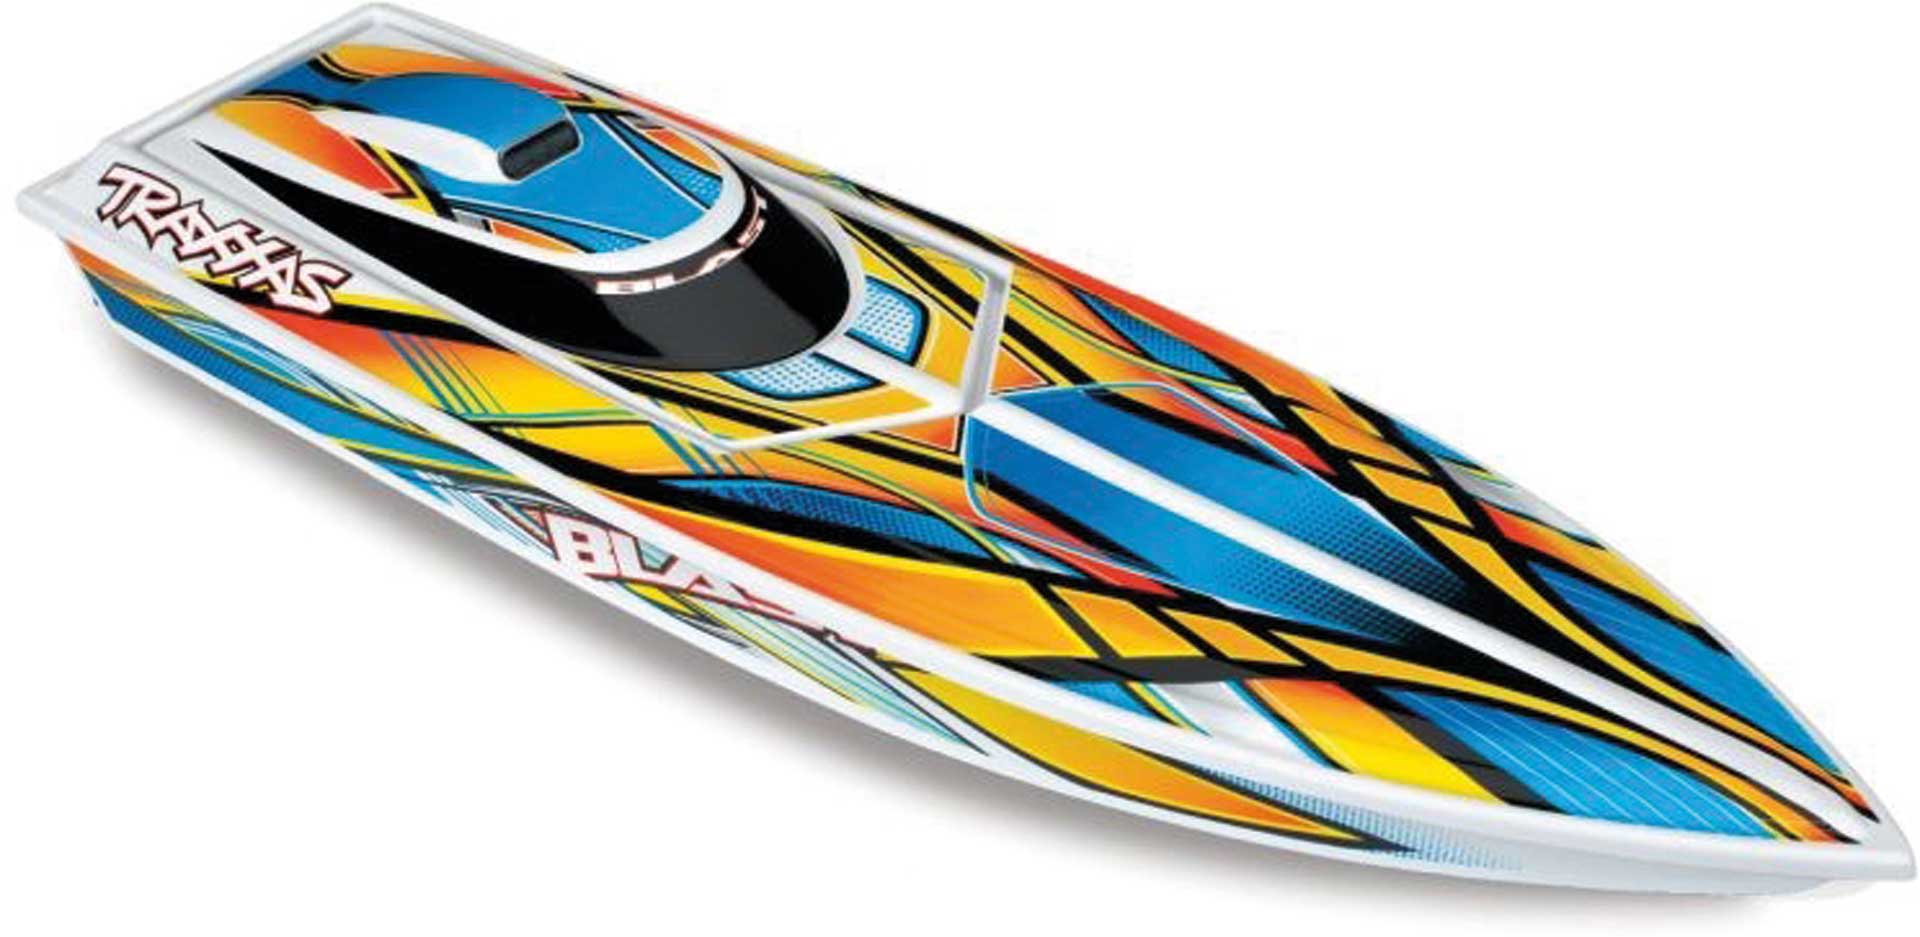 TRAXXAS BLAST WHITE/ORANGE 23-INCH RACE BOAT BRUSHED WITH BATTERY AND USB-C CHARGER